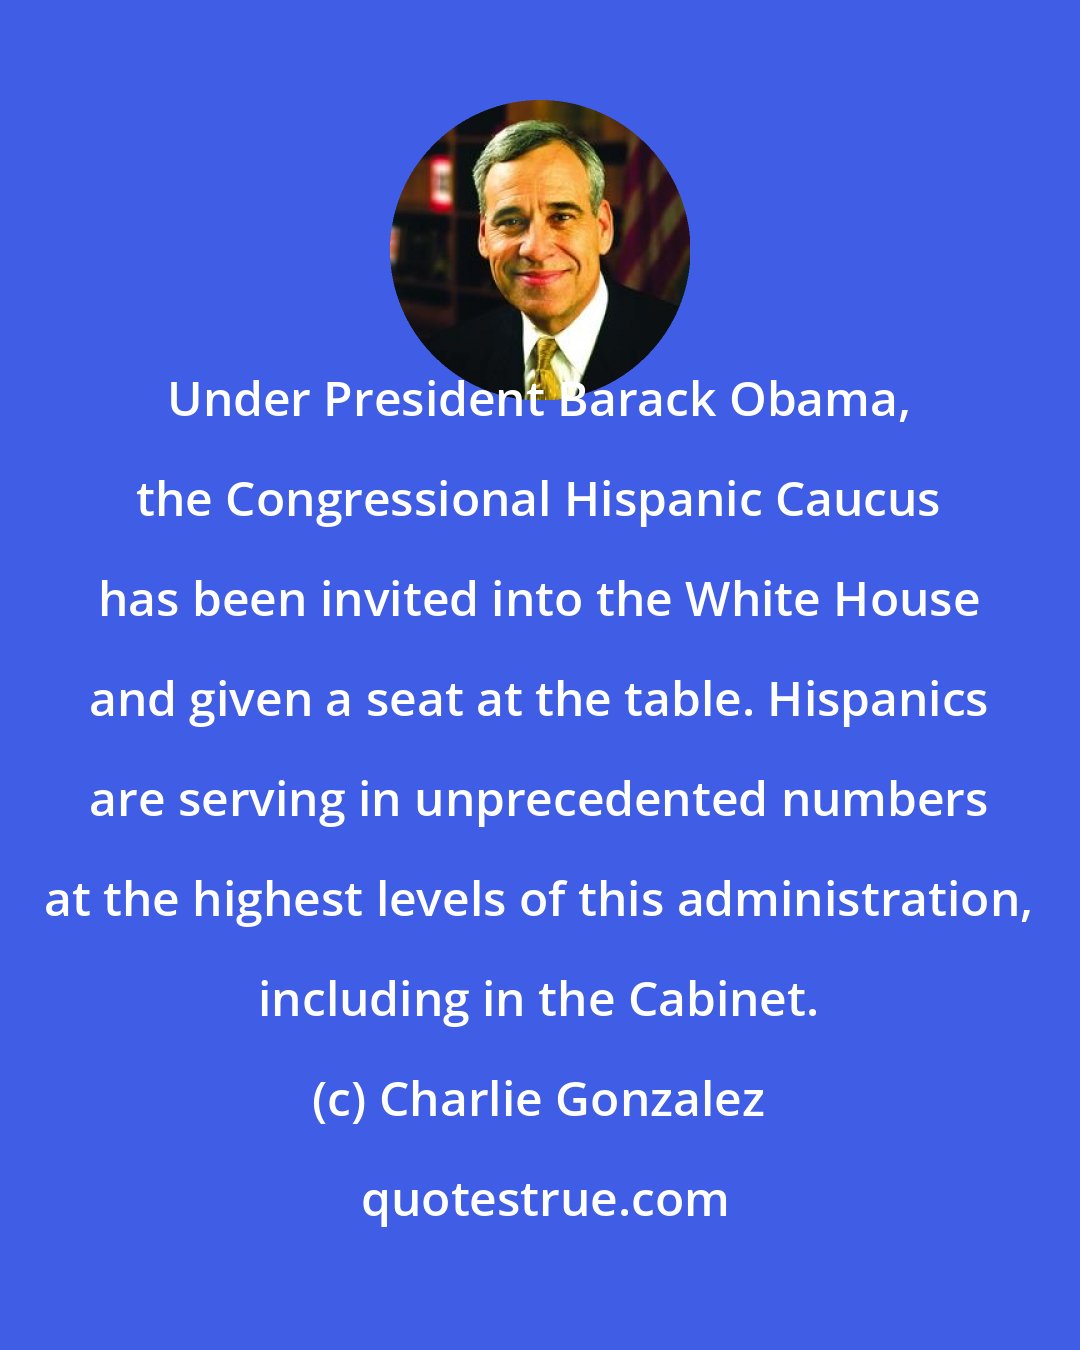 Charlie Gonzalez: Under President Barack Obama, the Congressional Hispanic Caucus has been invited into the White House and given a seat at the table. Hispanics are serving in unprecedented numbers at the highest levels of this administration, including in the Cabinet.